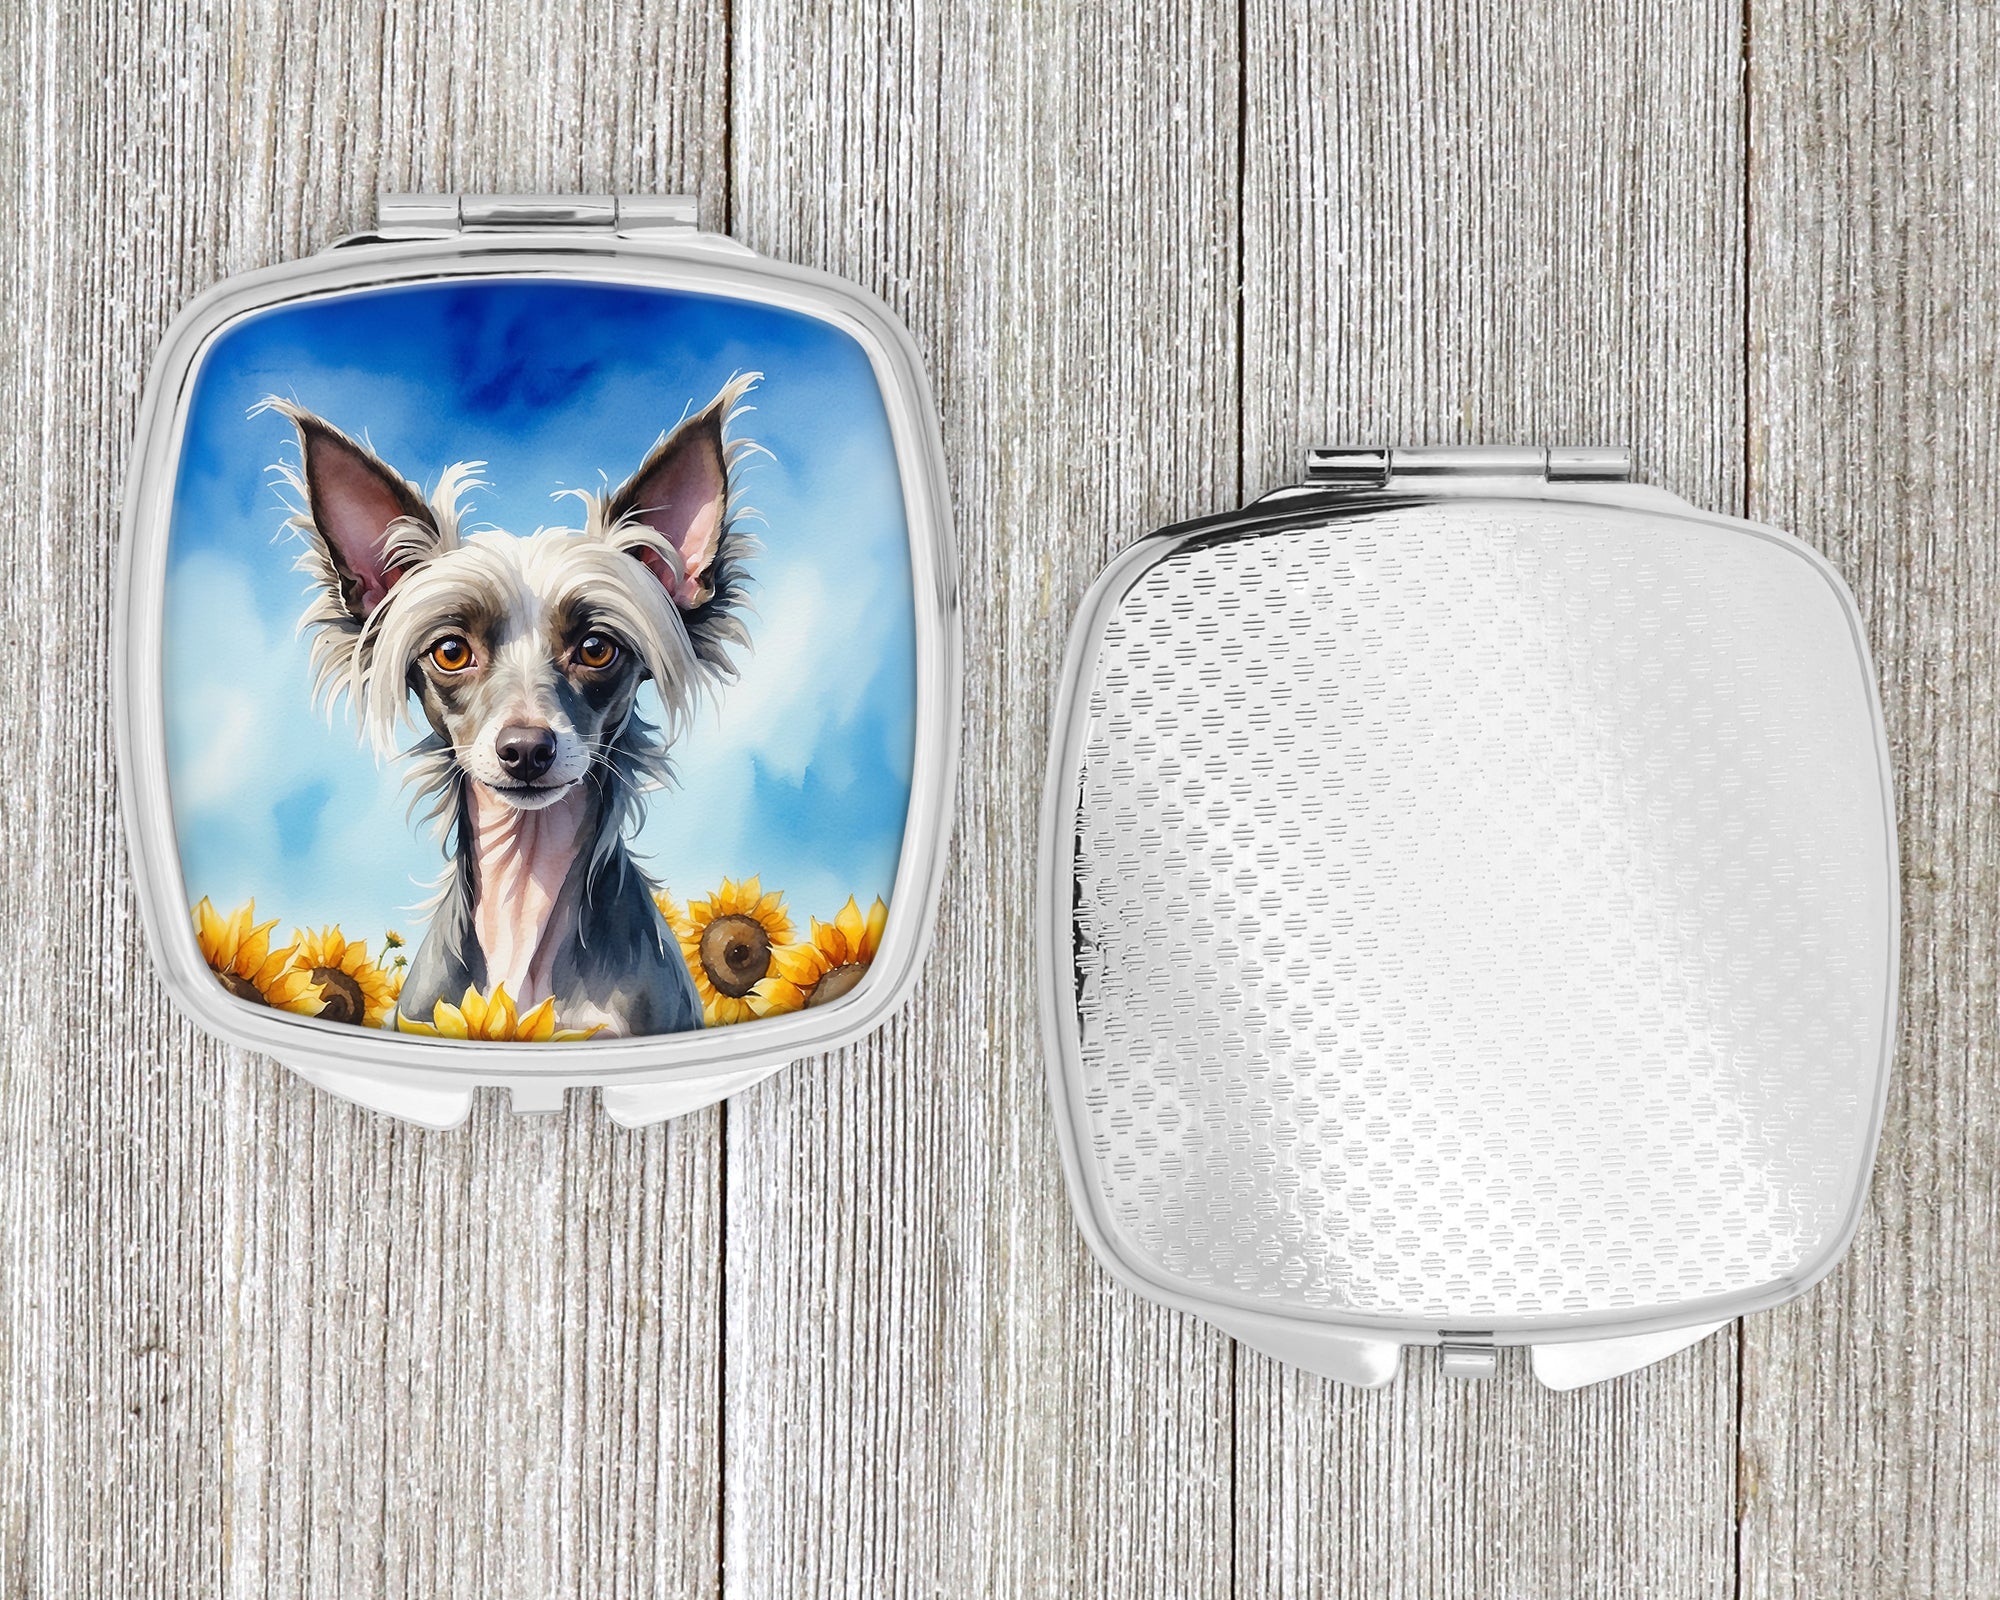 Chinese Crested in Sunflowers Compact Mirror